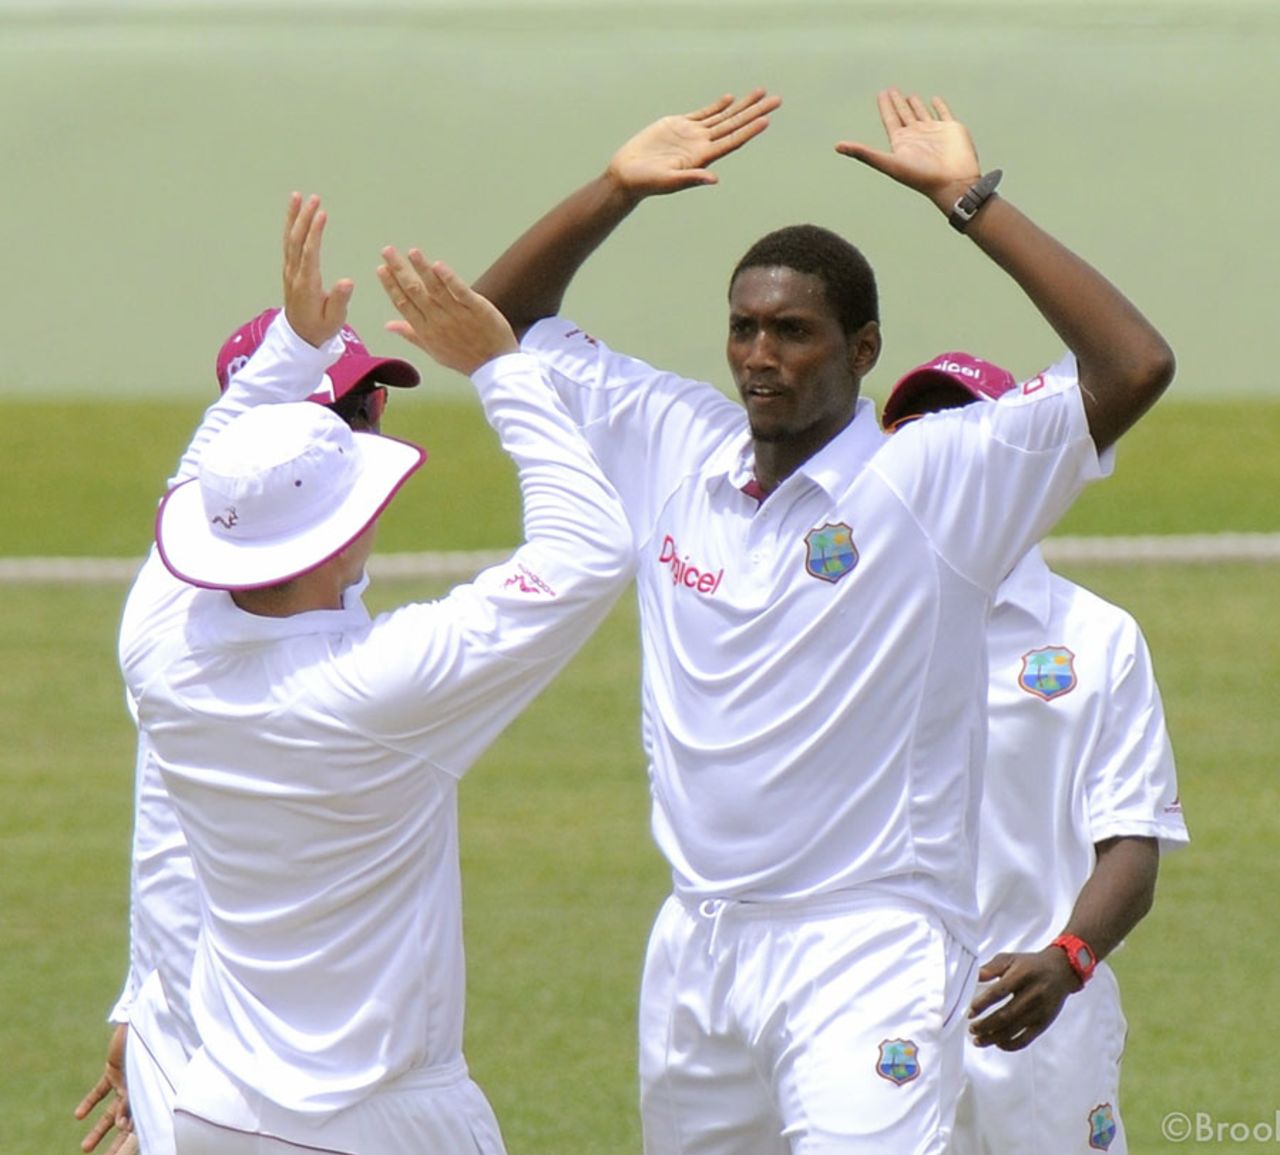 Delorn Johnson took six wickets as India A were bundled out for 94, West Indies A v India A, 2nd unofficial Test, St Vincent, 4th day, June 12, 2012